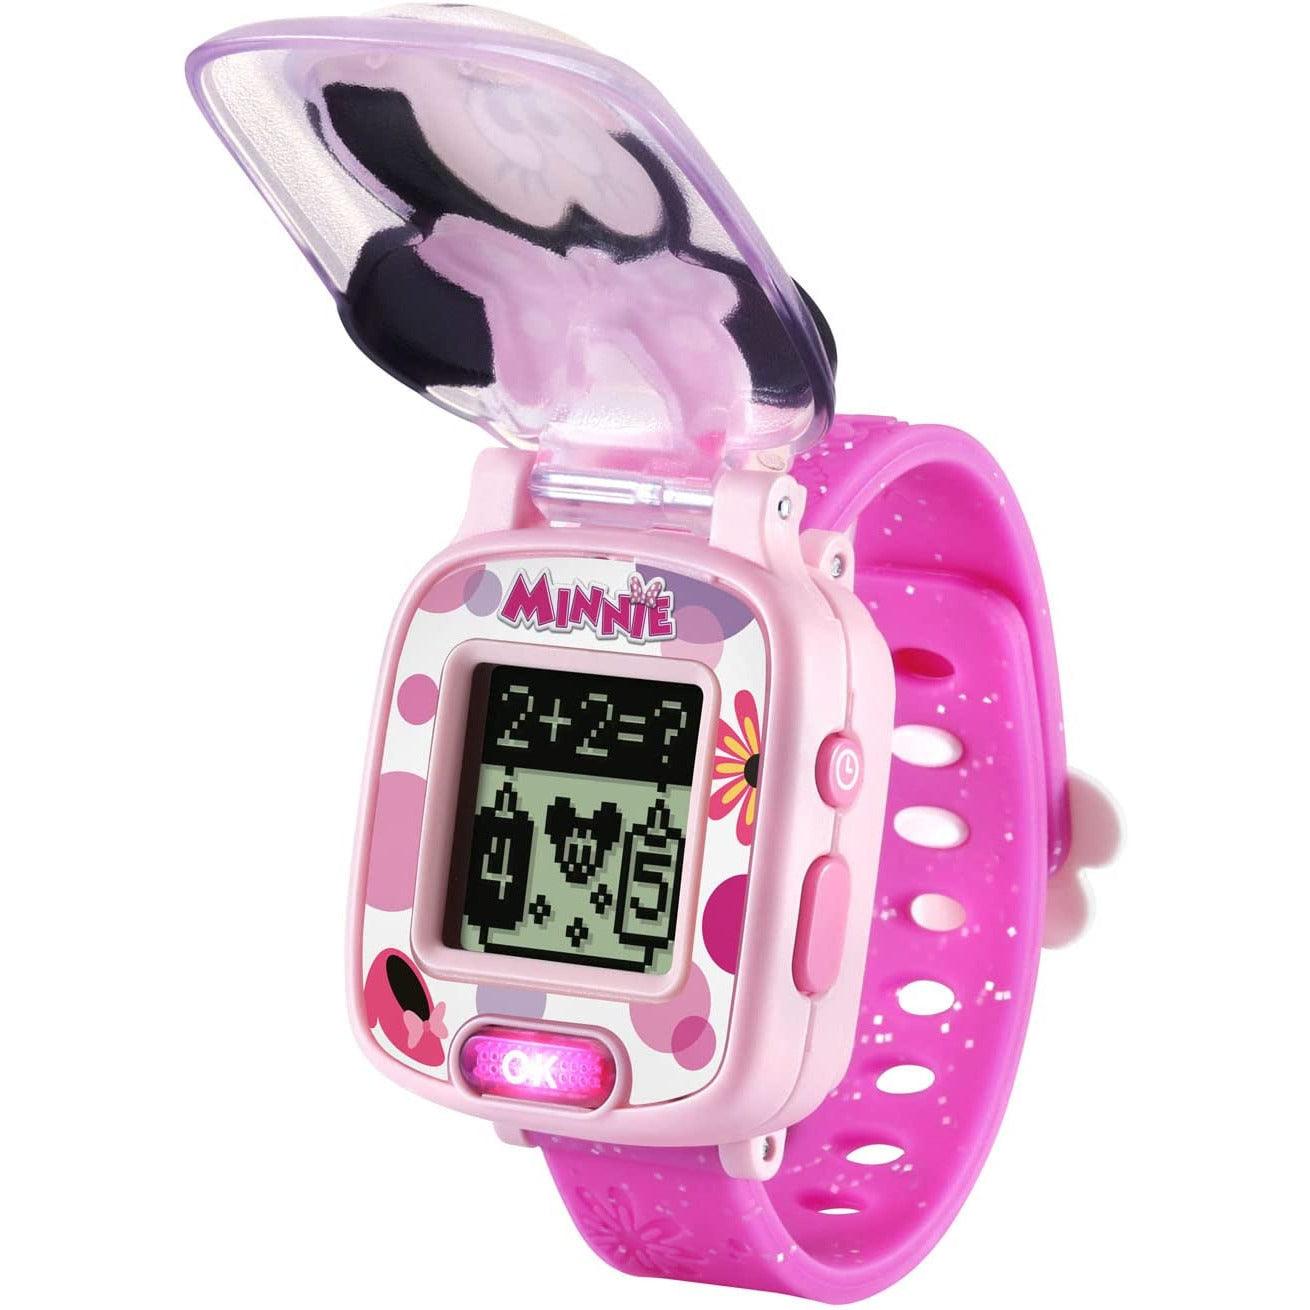 VTech Disney Junior Minnie - Minnie Mouse Learning Watch - BumbleToys - 5-7 Years, Kids, minne, Pre-Order, Watch